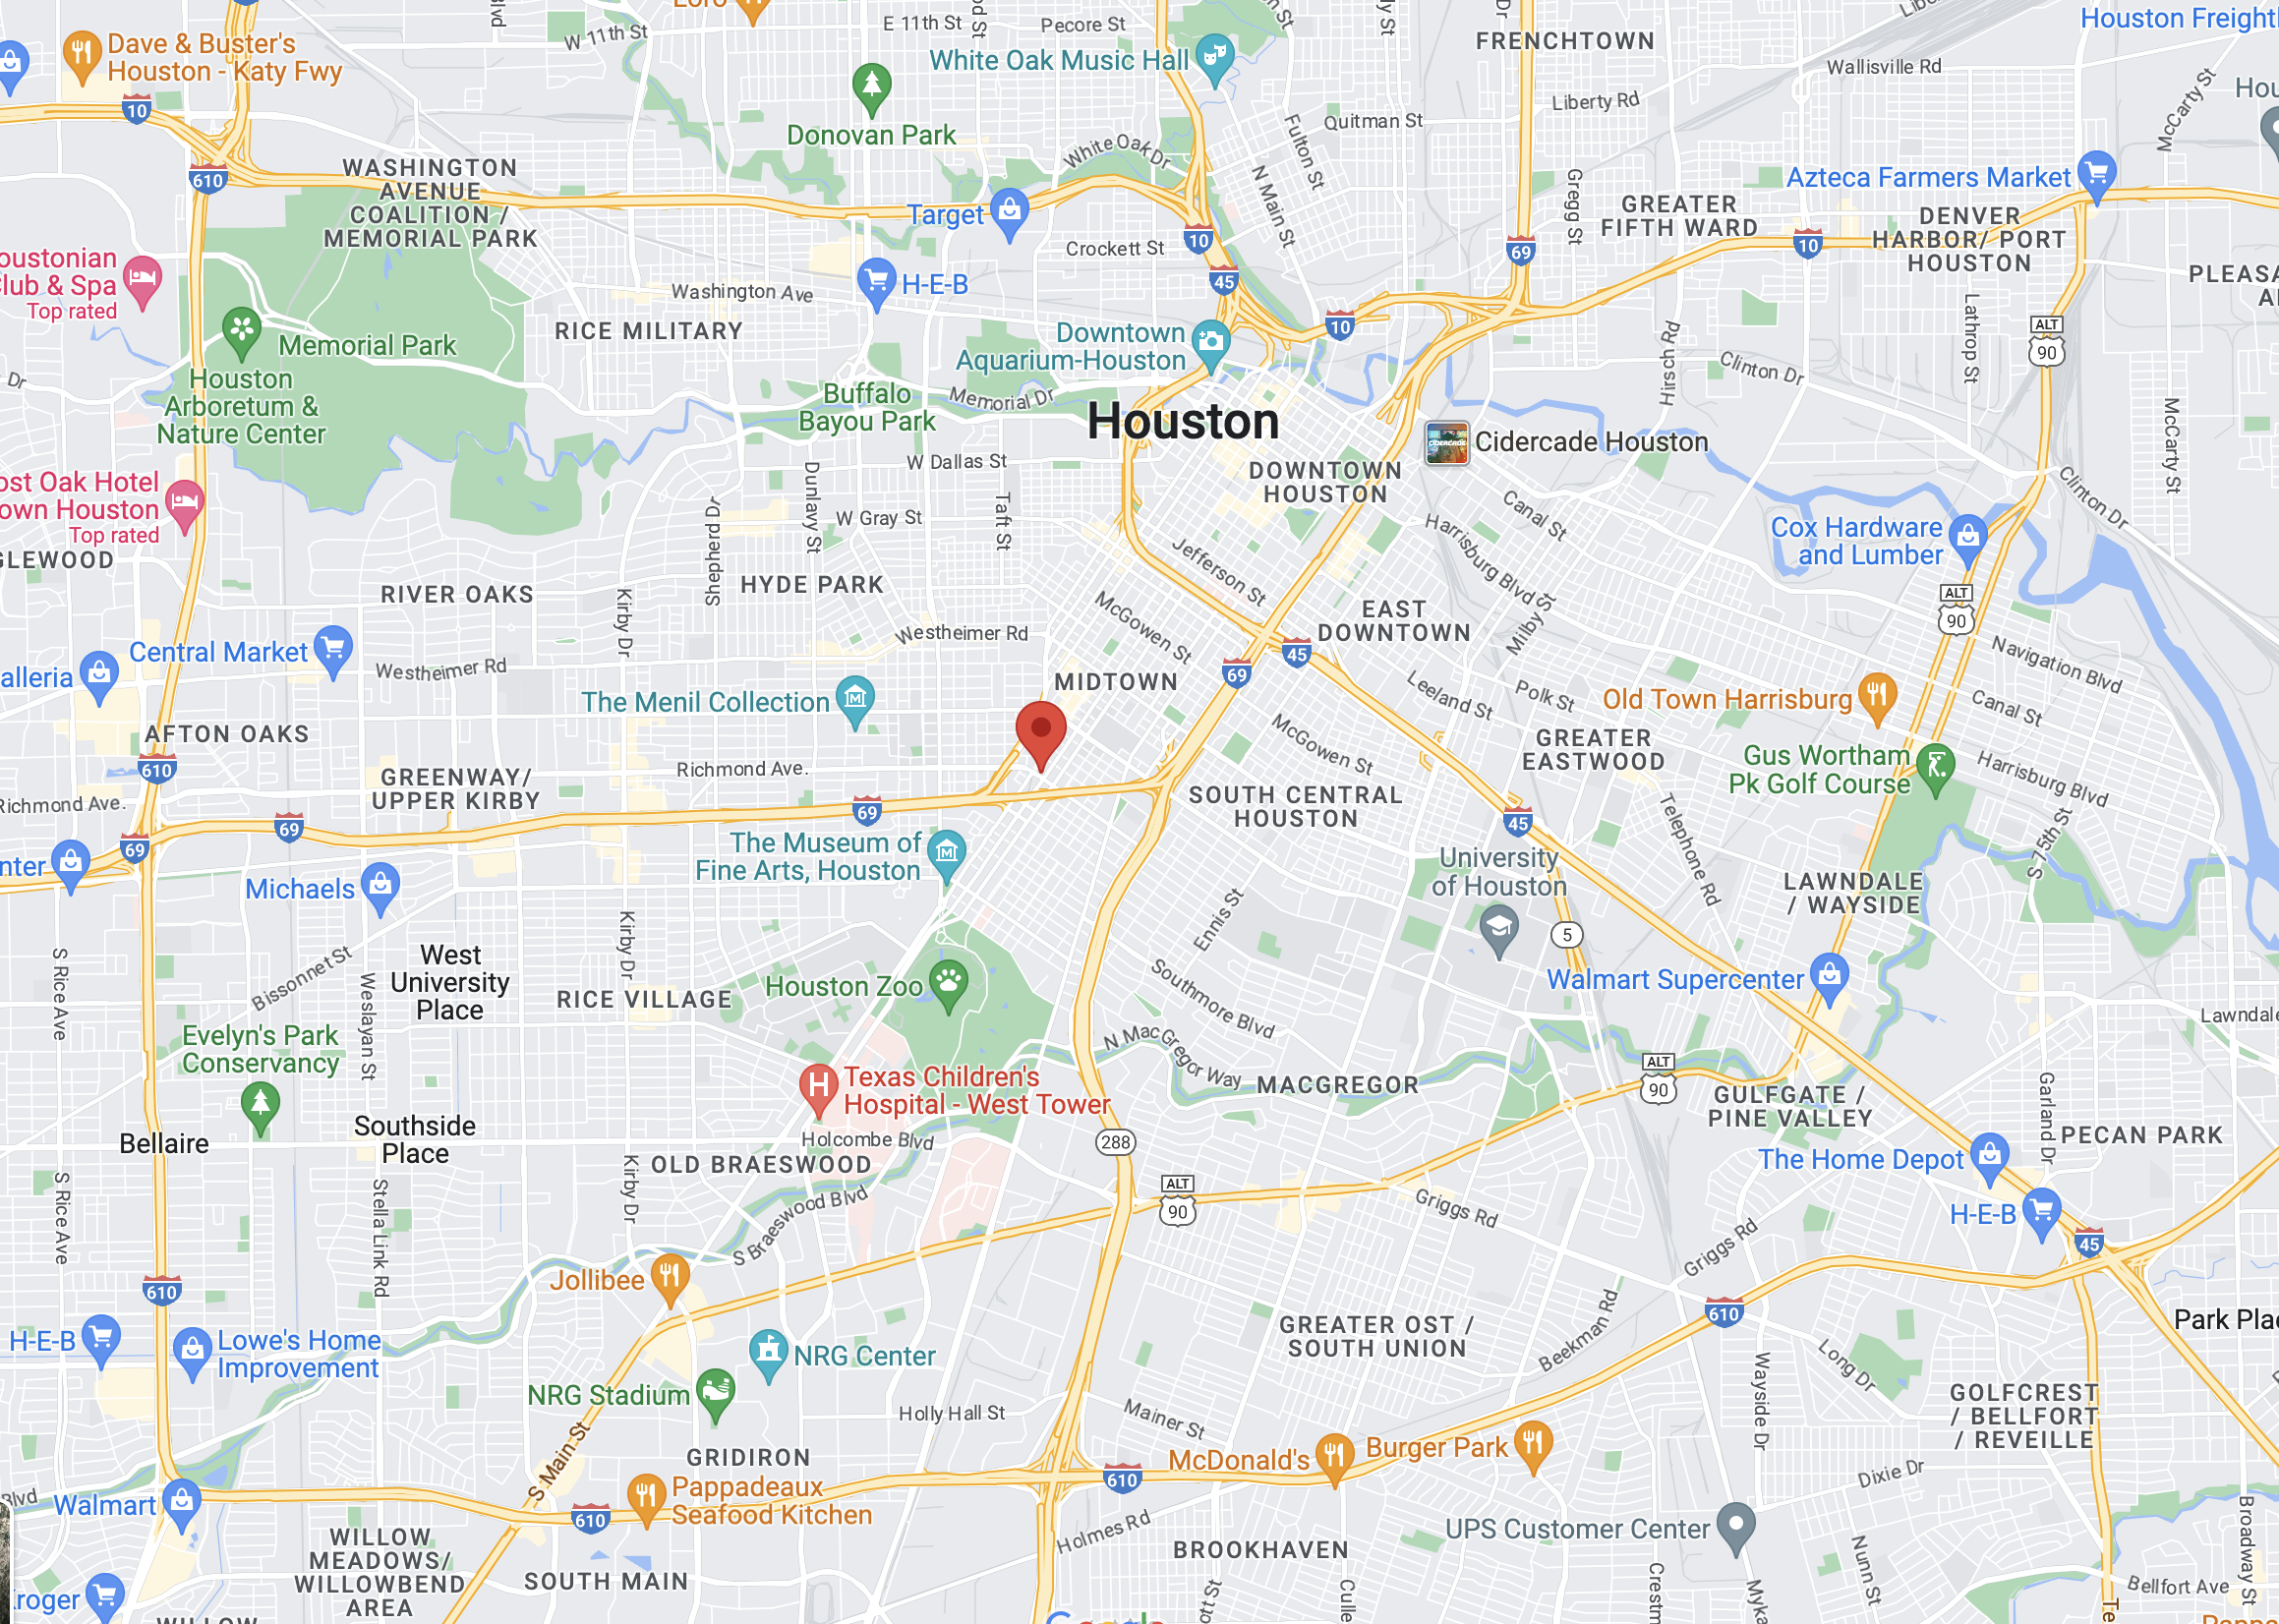 Image of Google Maps with marker on Liongard office location.